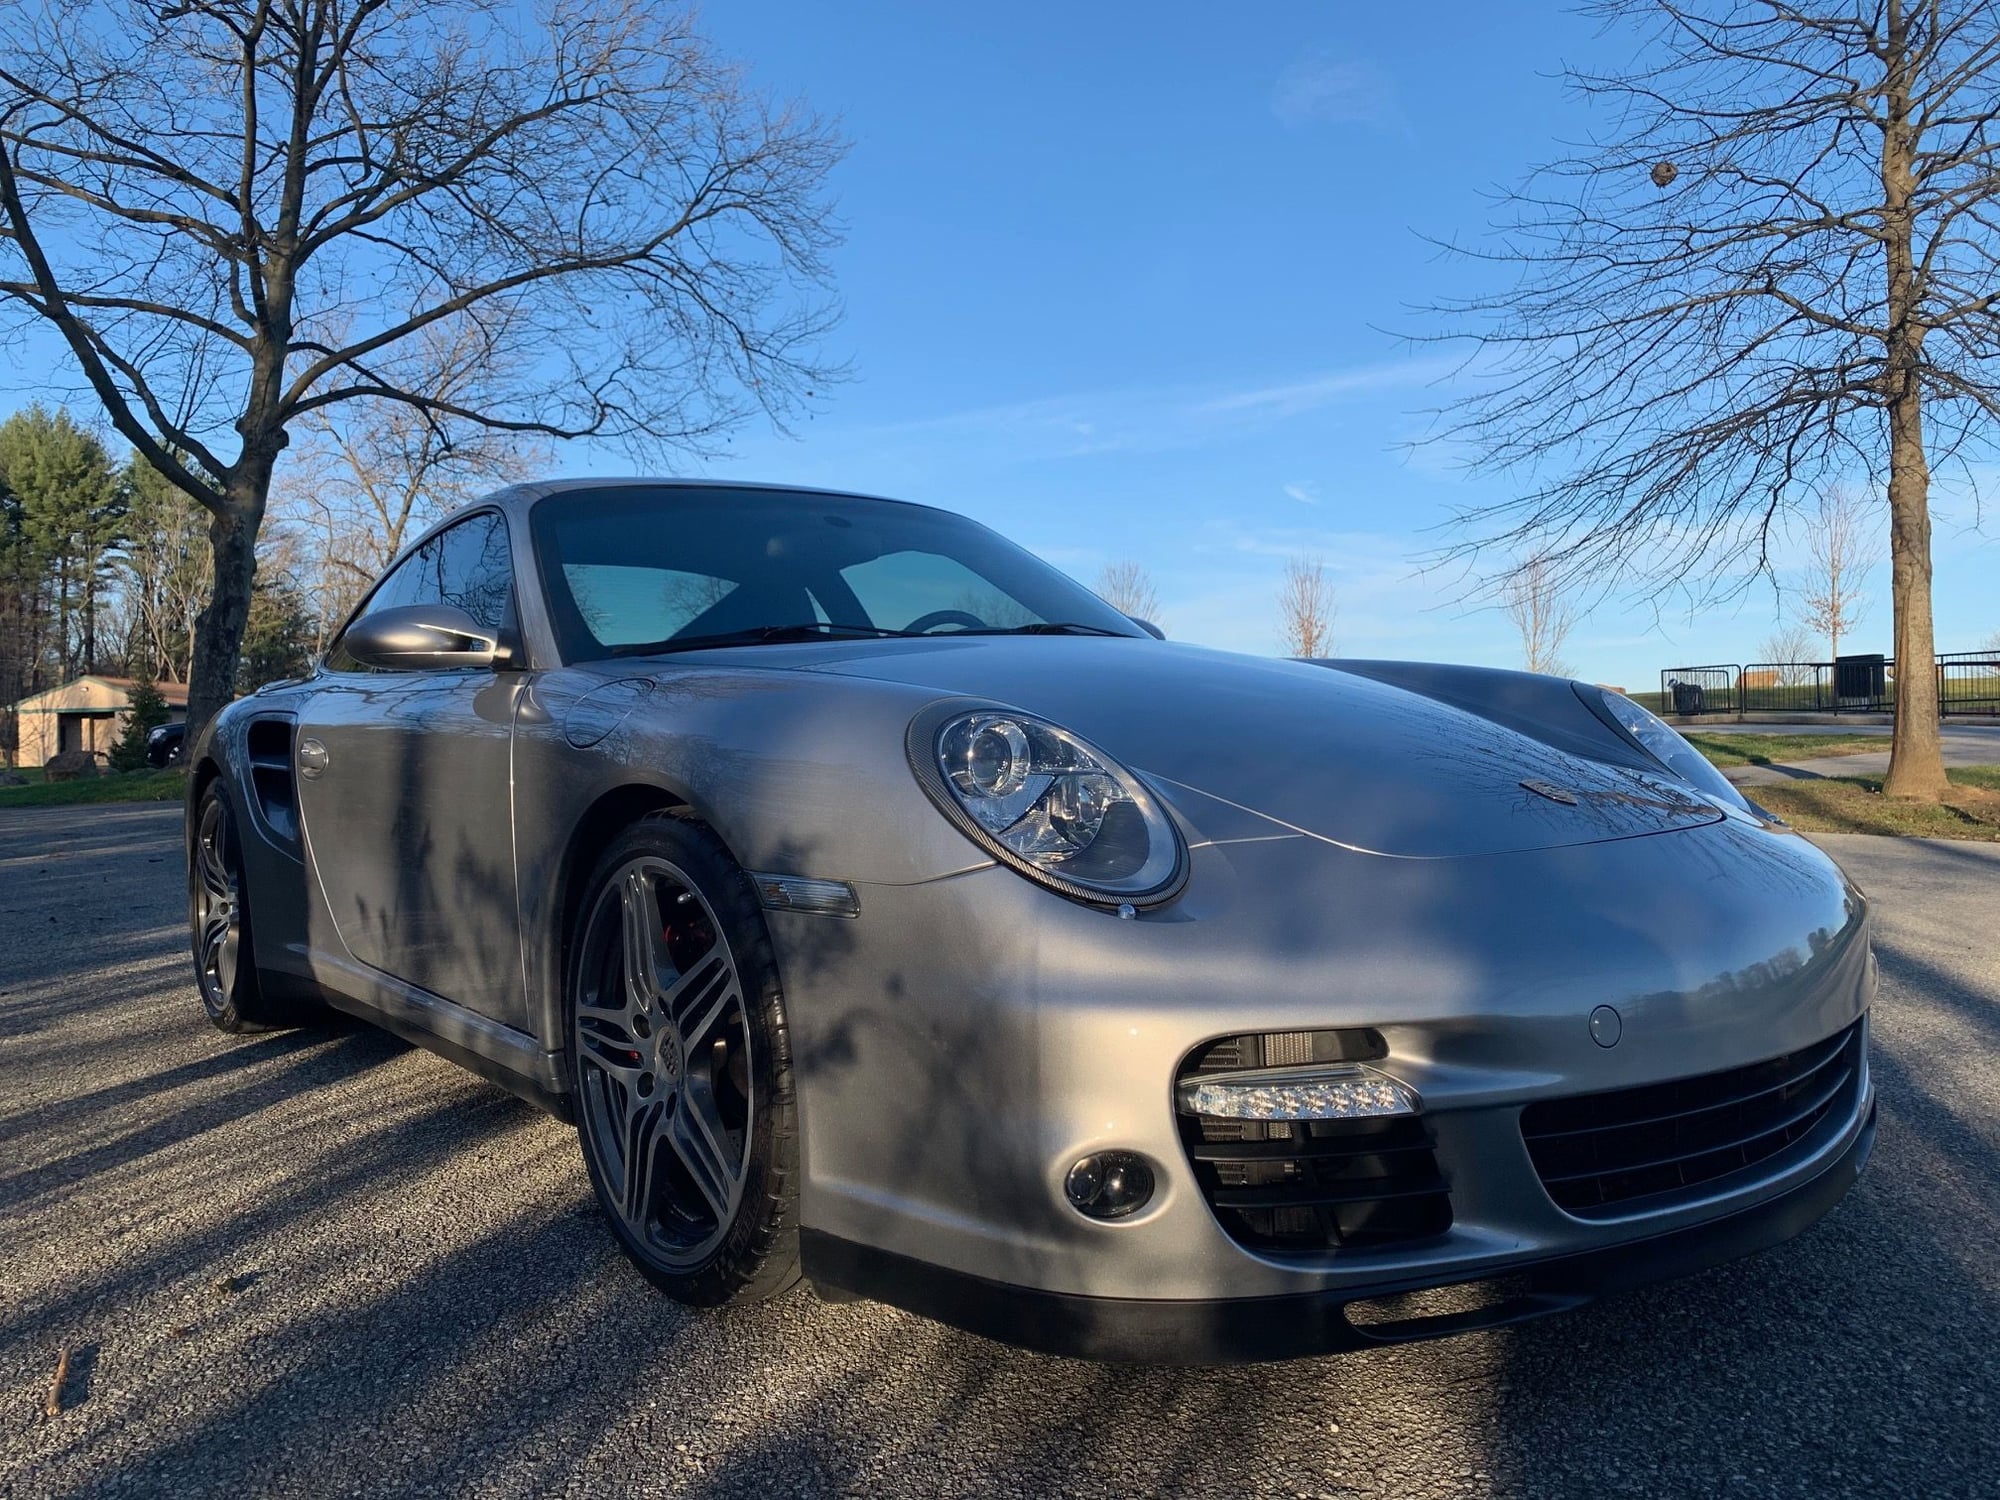 2008 Porsche 911 - 2008 911 Turbo 6-Speed Manual - 29.7k Miles - Stock -  GT Silver on Cocoa - Used - VIN WP0AD29938S783501 - 29,750 Miles - 6 cyl - AWD - Manual - Coupe - Silver - West Chester, PA 19380, United States